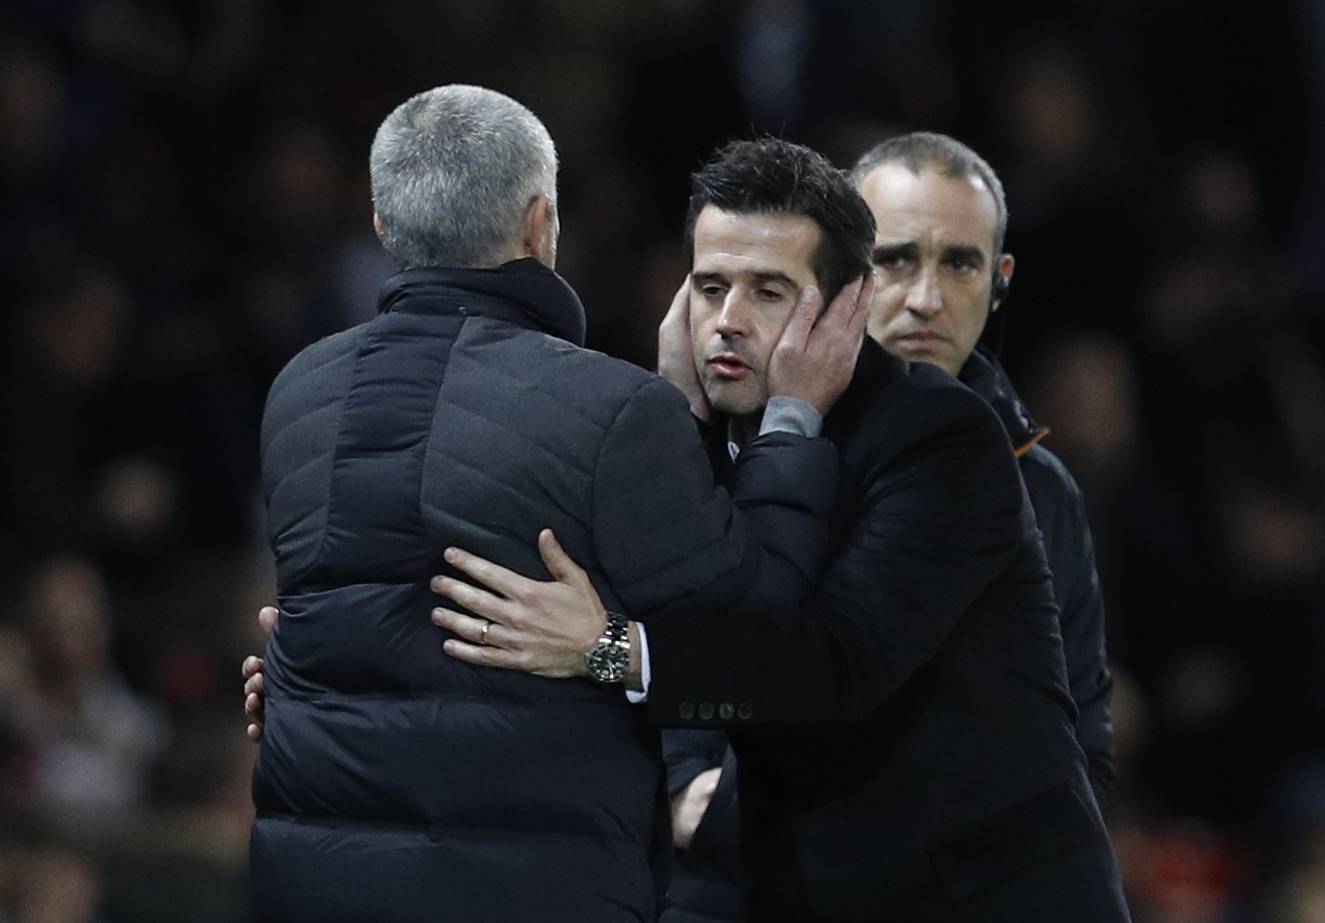 Manchester United manager Jose Mourinho and Hull City manager Marco Silva after the game